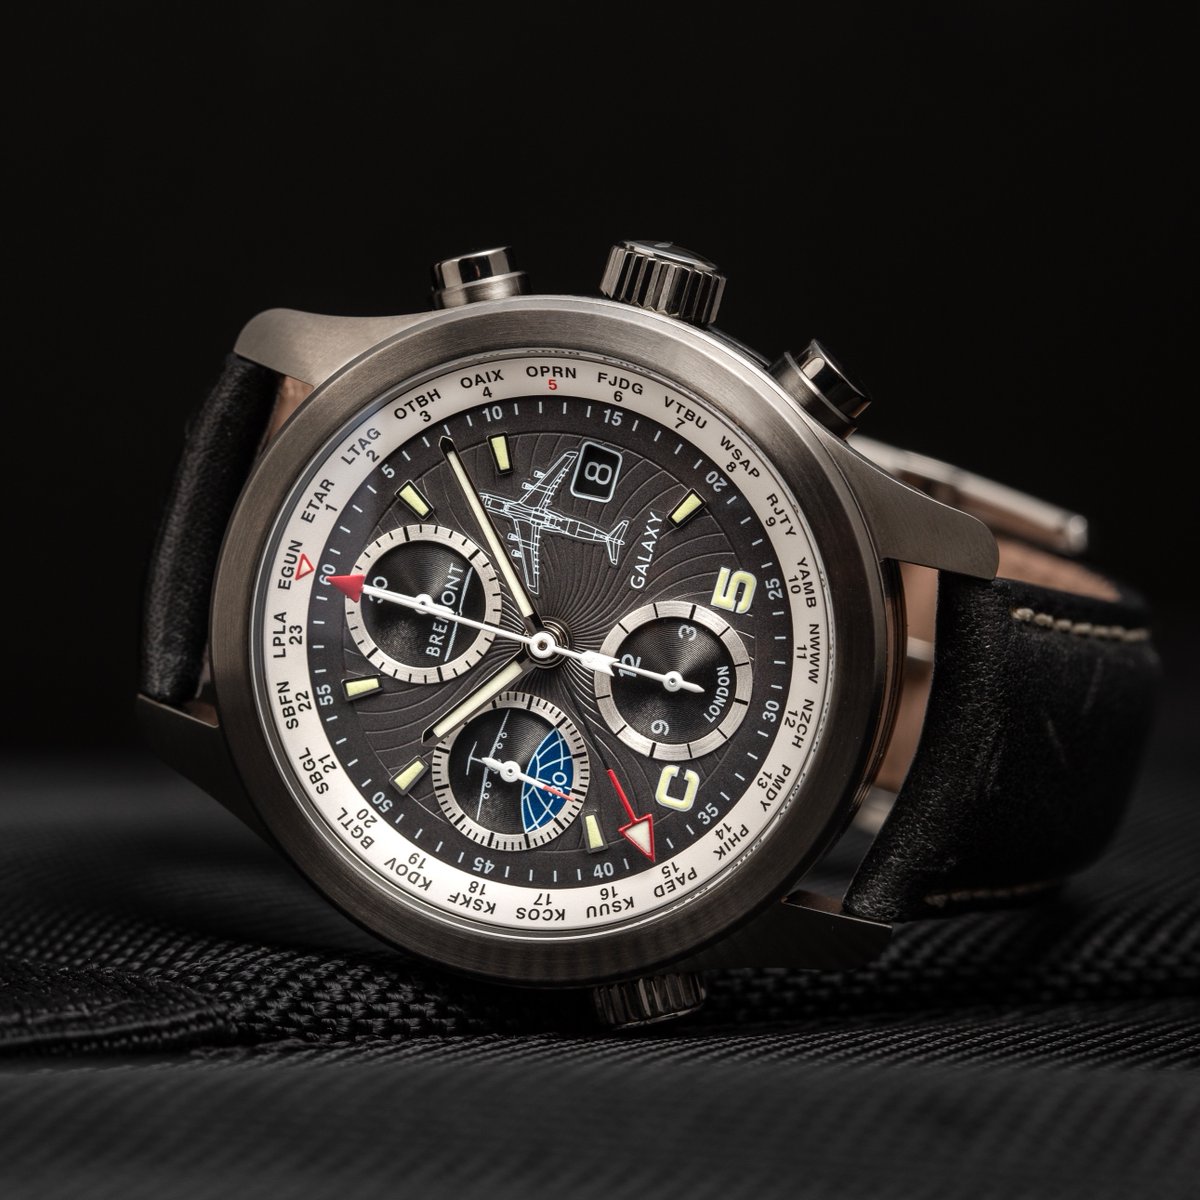 Designed by the 312th Airlift Squadron, the Bremont ALT1-WT C-5M Aircrew Watch. This watch is available exclusively to current and past USAF C-5M Aircrew members. To enquire, please contact military@bremont.com #Bremont #Watches #USAF #312thAirlift #C-5M